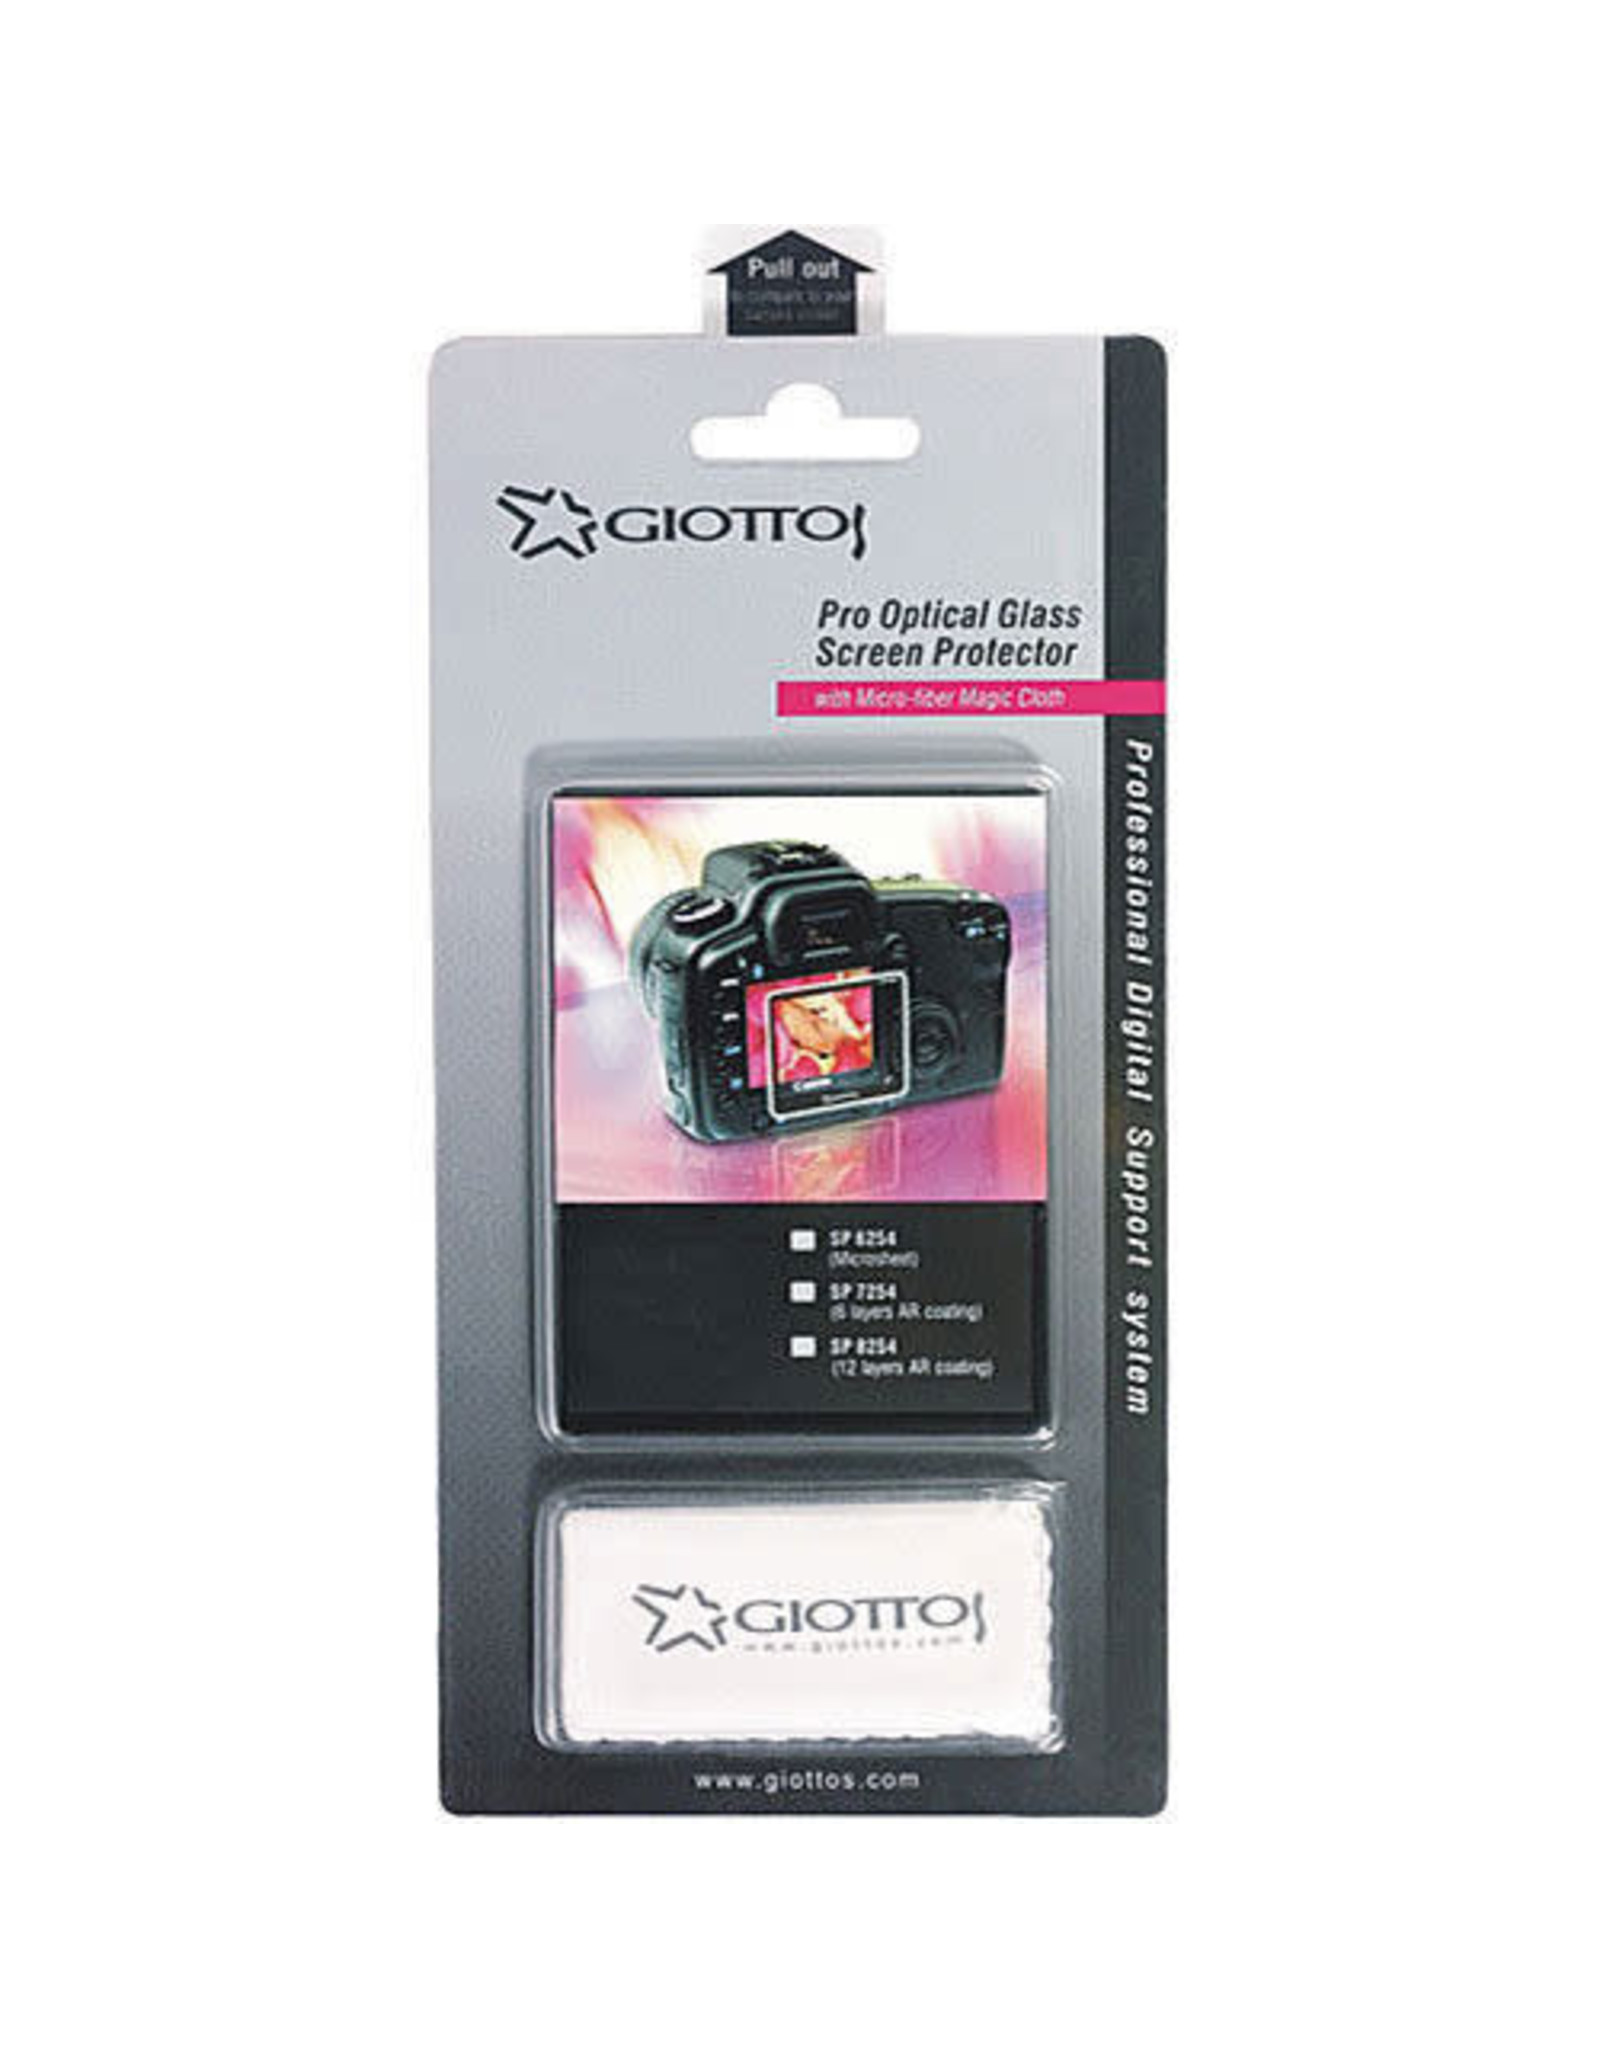 Giottos Aegis Professional M-C Schott Glass LCD Screen Protector for Nikon D80